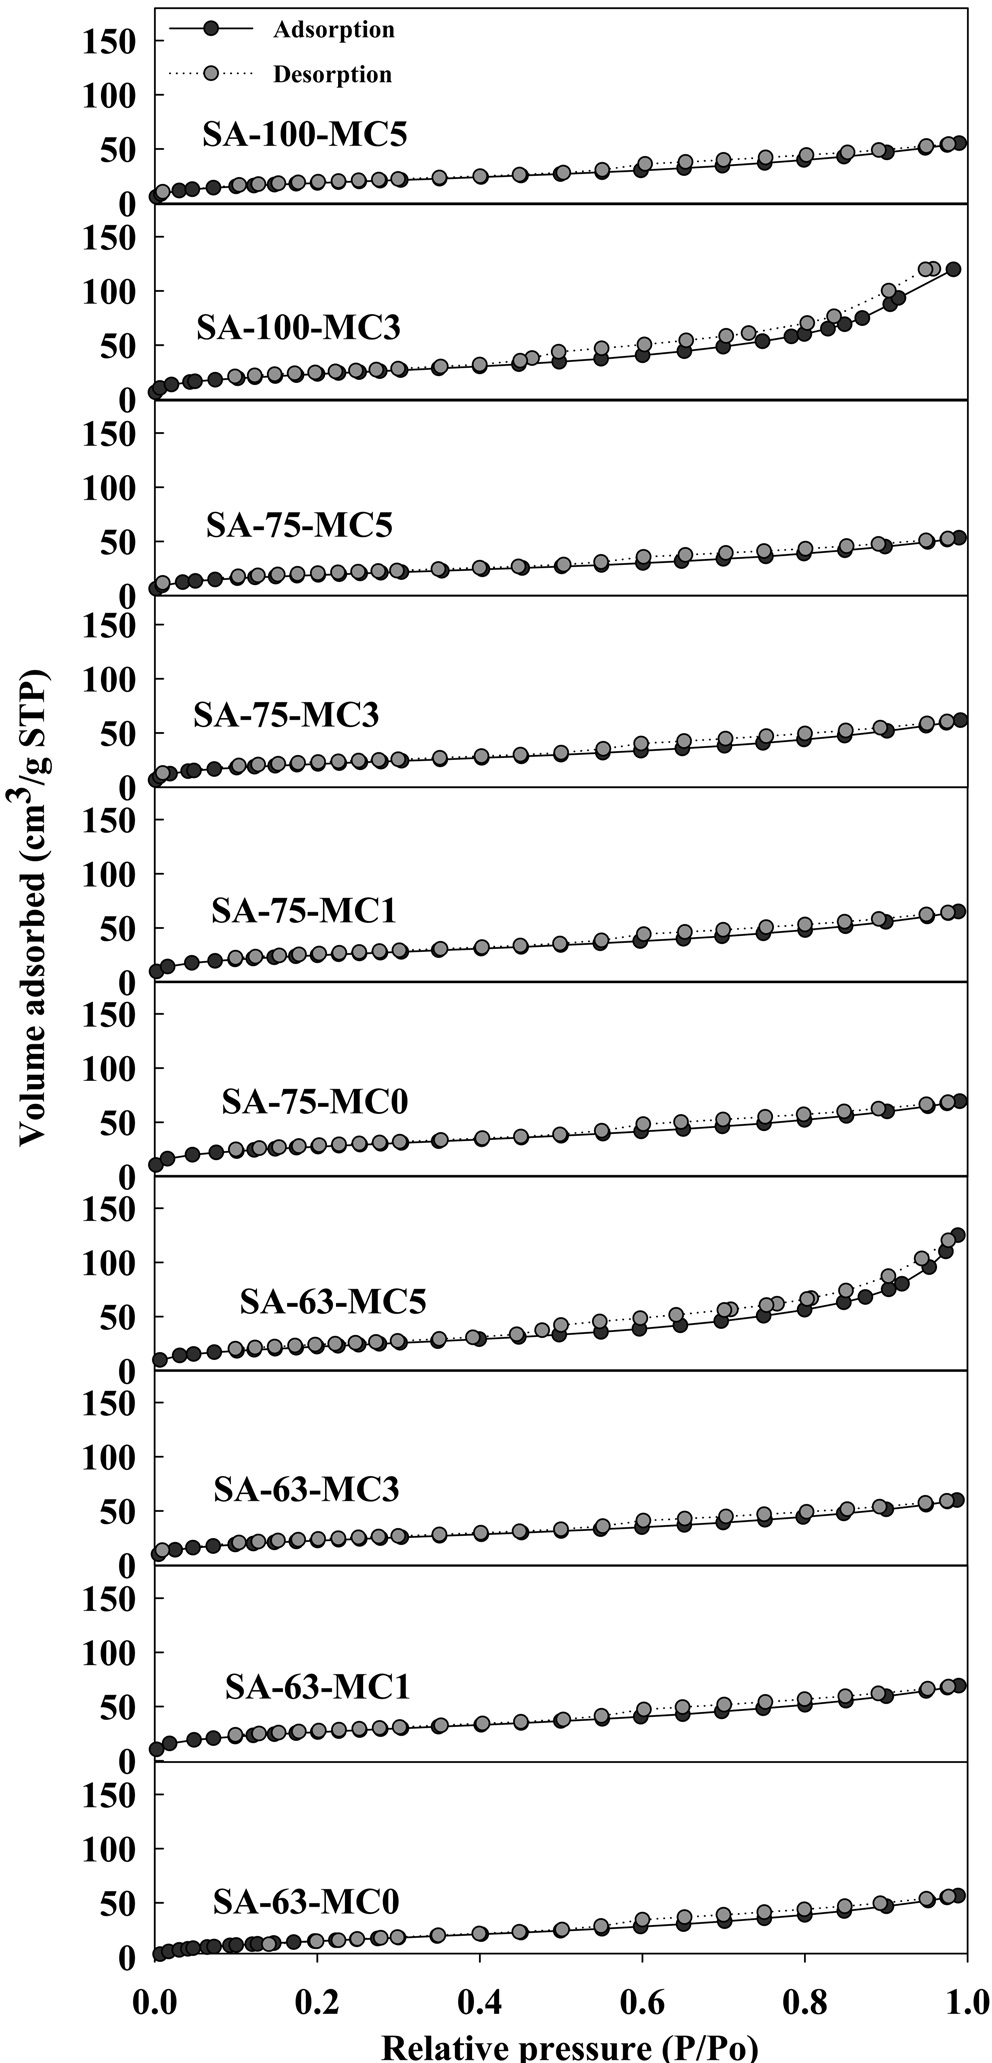 Nitrogen adsorption-desorption isotherms of the pellettype adsorbents.